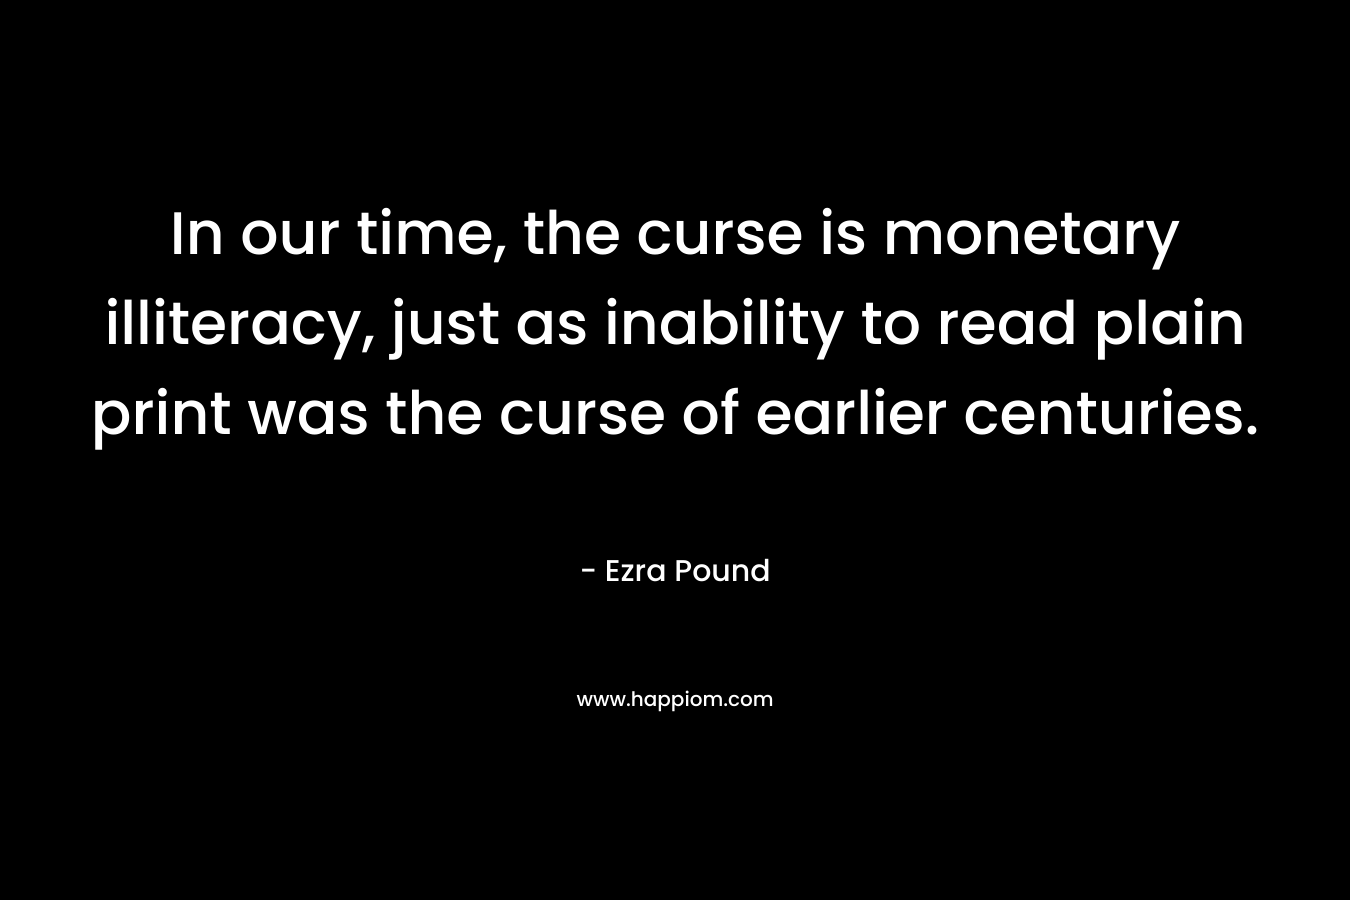 In our time, the curse is monetary illiteracy, just as inability to read plain print was the curse of earlier centuries.